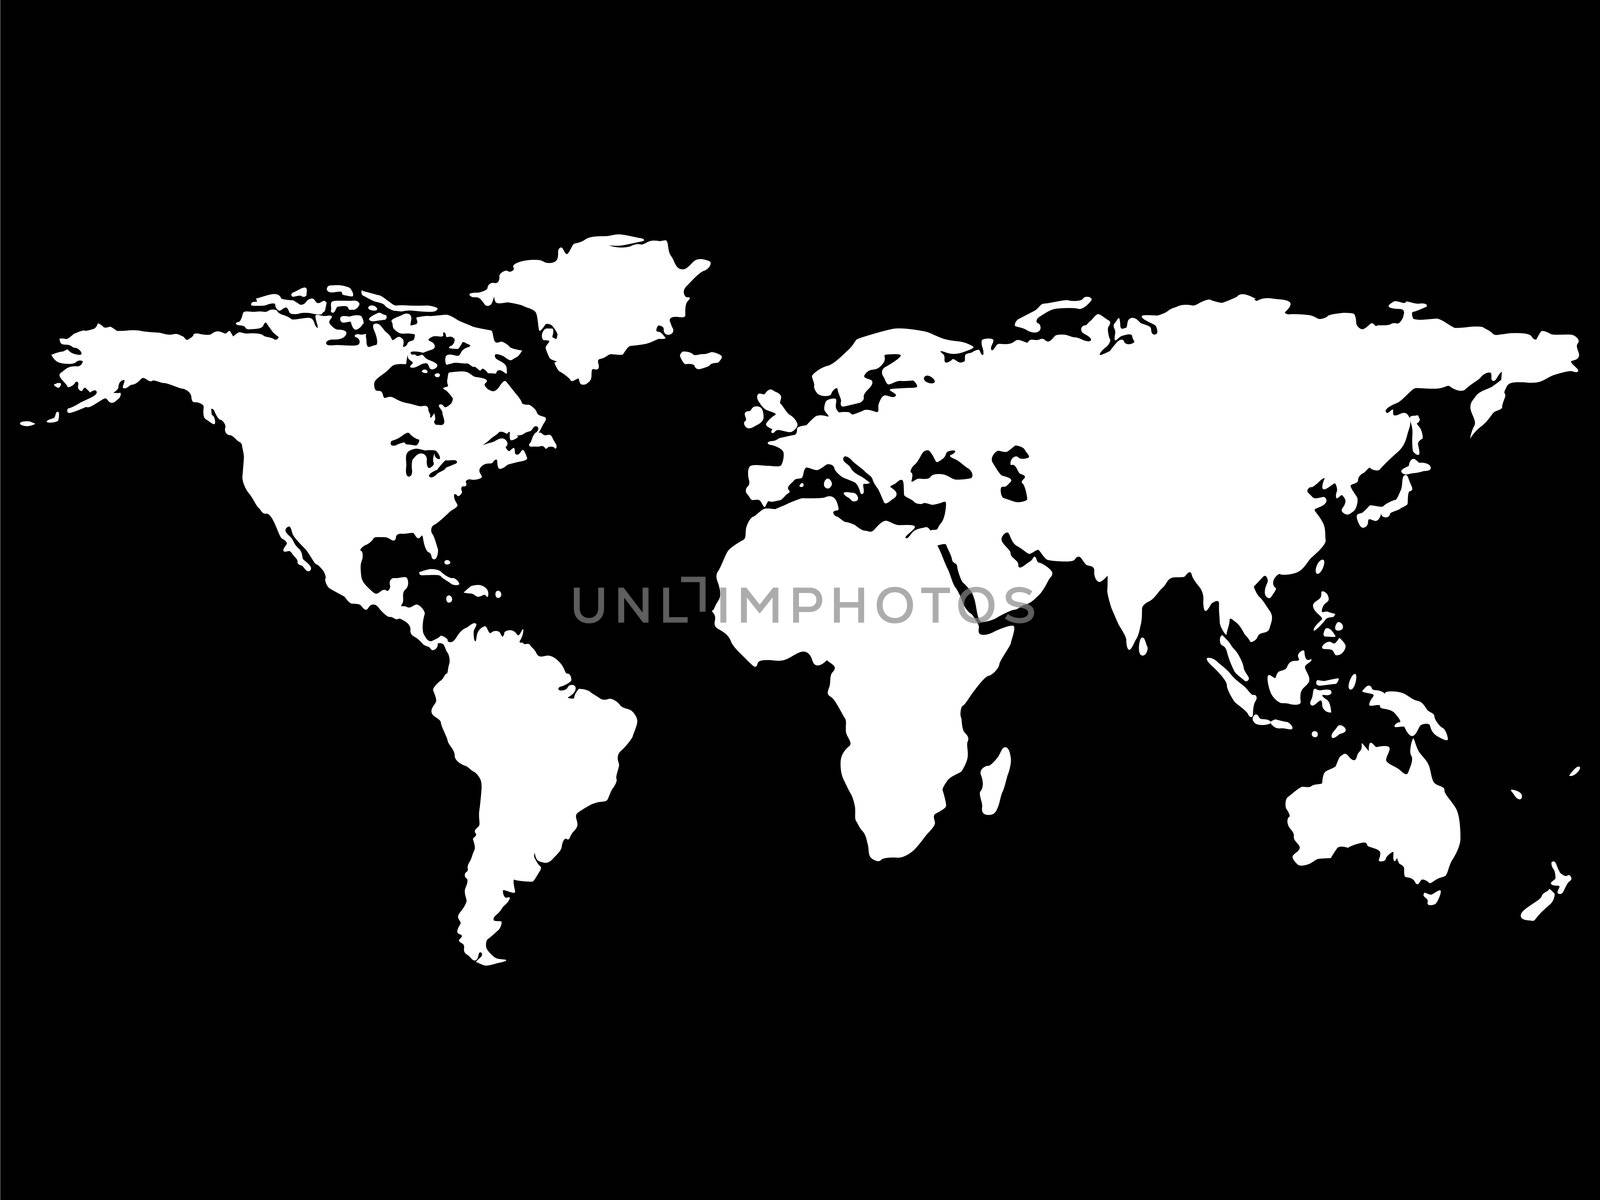 white world map isolated on black background, abstract art illustration